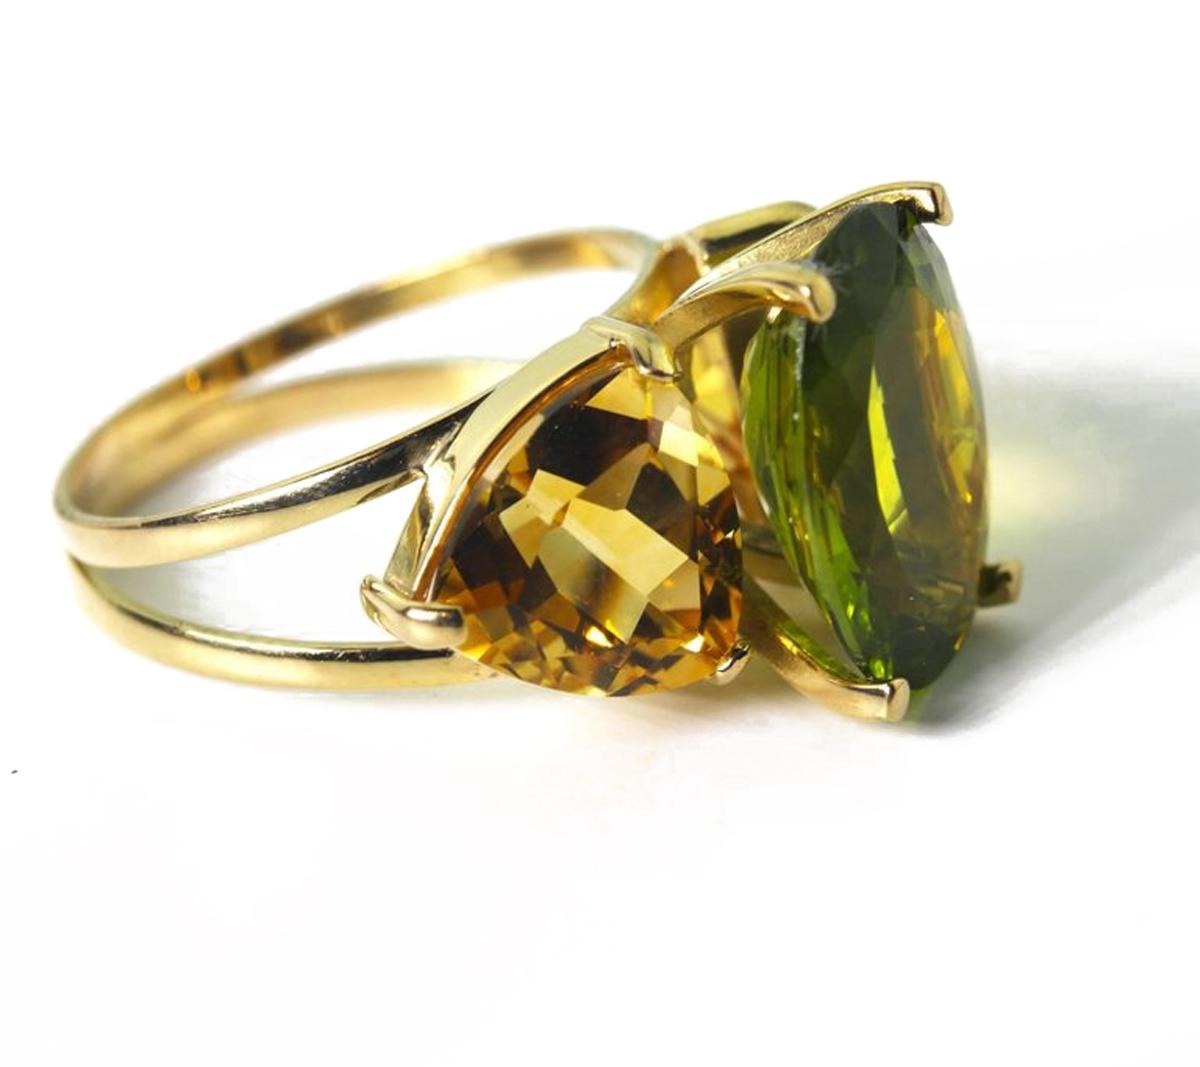 AJD Spectacular Intense 6 Ct Peridot & 5 Ct Citrine 18Kt Yellow Gold Ring 3